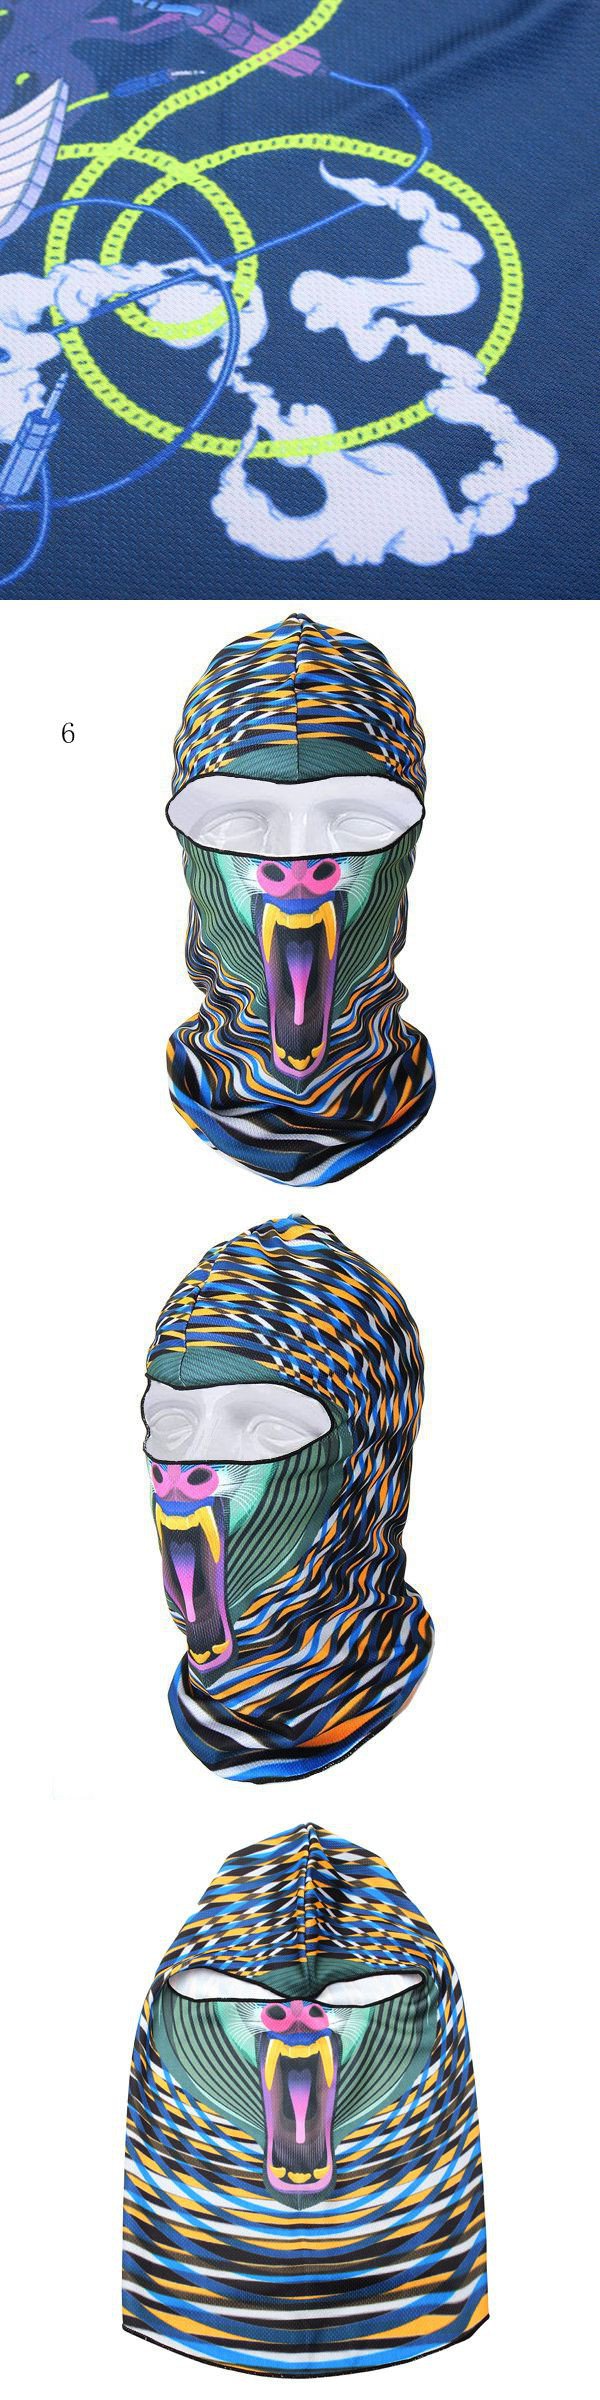 Men-Women-Winter-Neck-Face-Mask-Printed-Skiing-Hat-Cycling-Caps-1021402-6